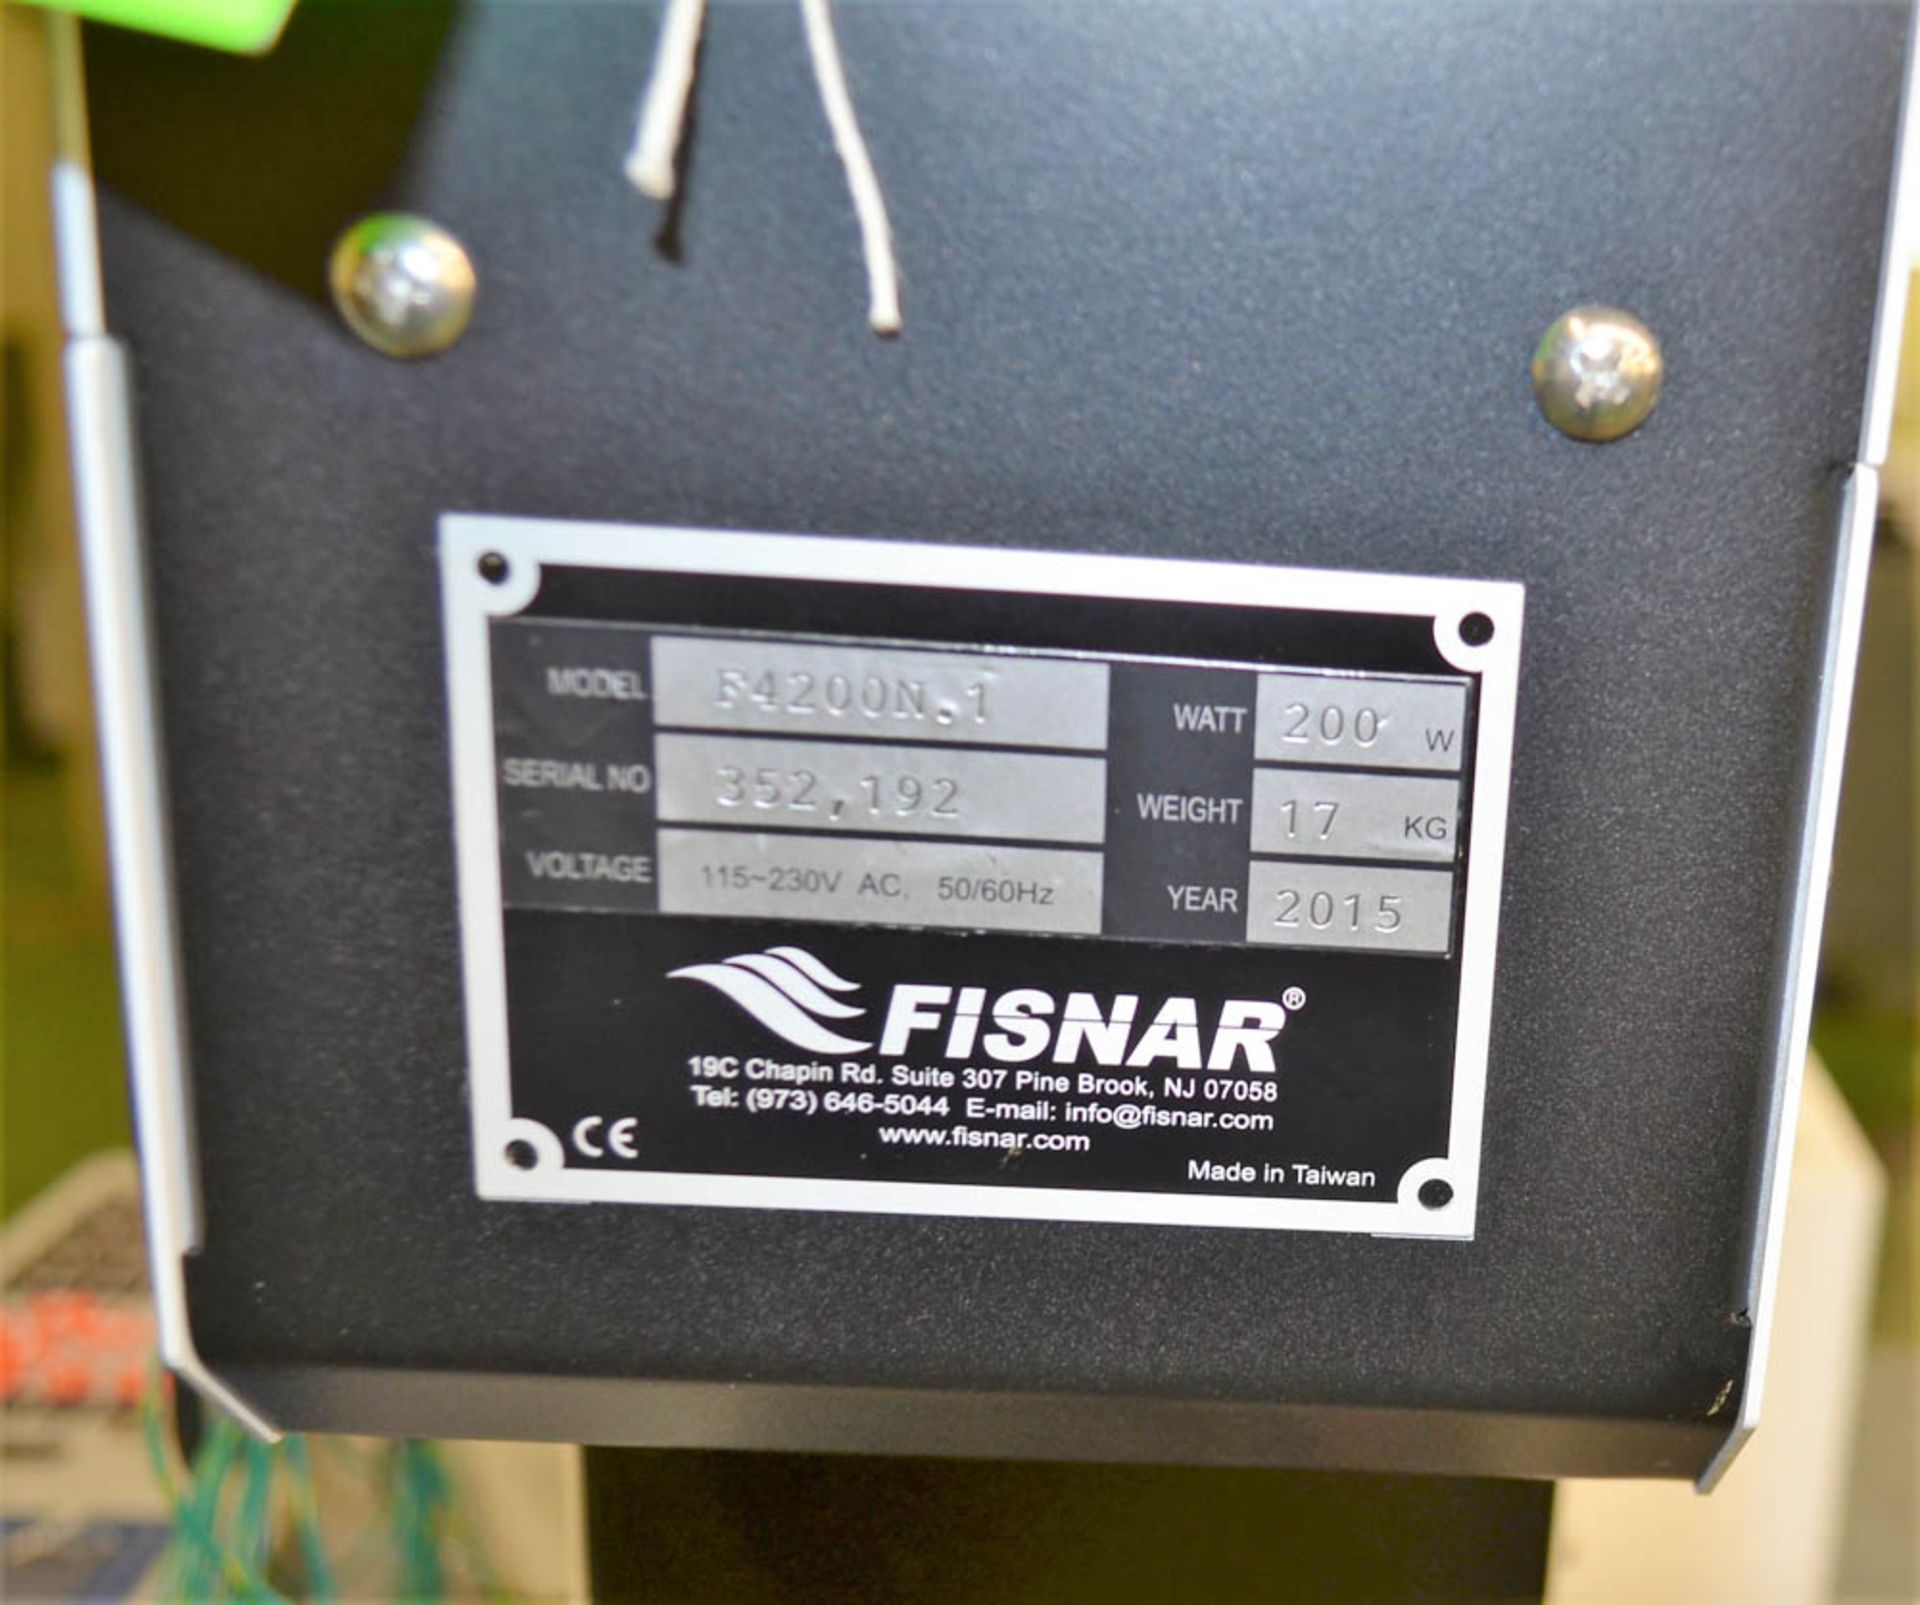 FISNAR MDL. F4200N AUTOMATIC SOLDER DISPENSING UNIT, WITH FISNAR CONTROLLER, PENDANT CONTROLS - Image 3 of 3